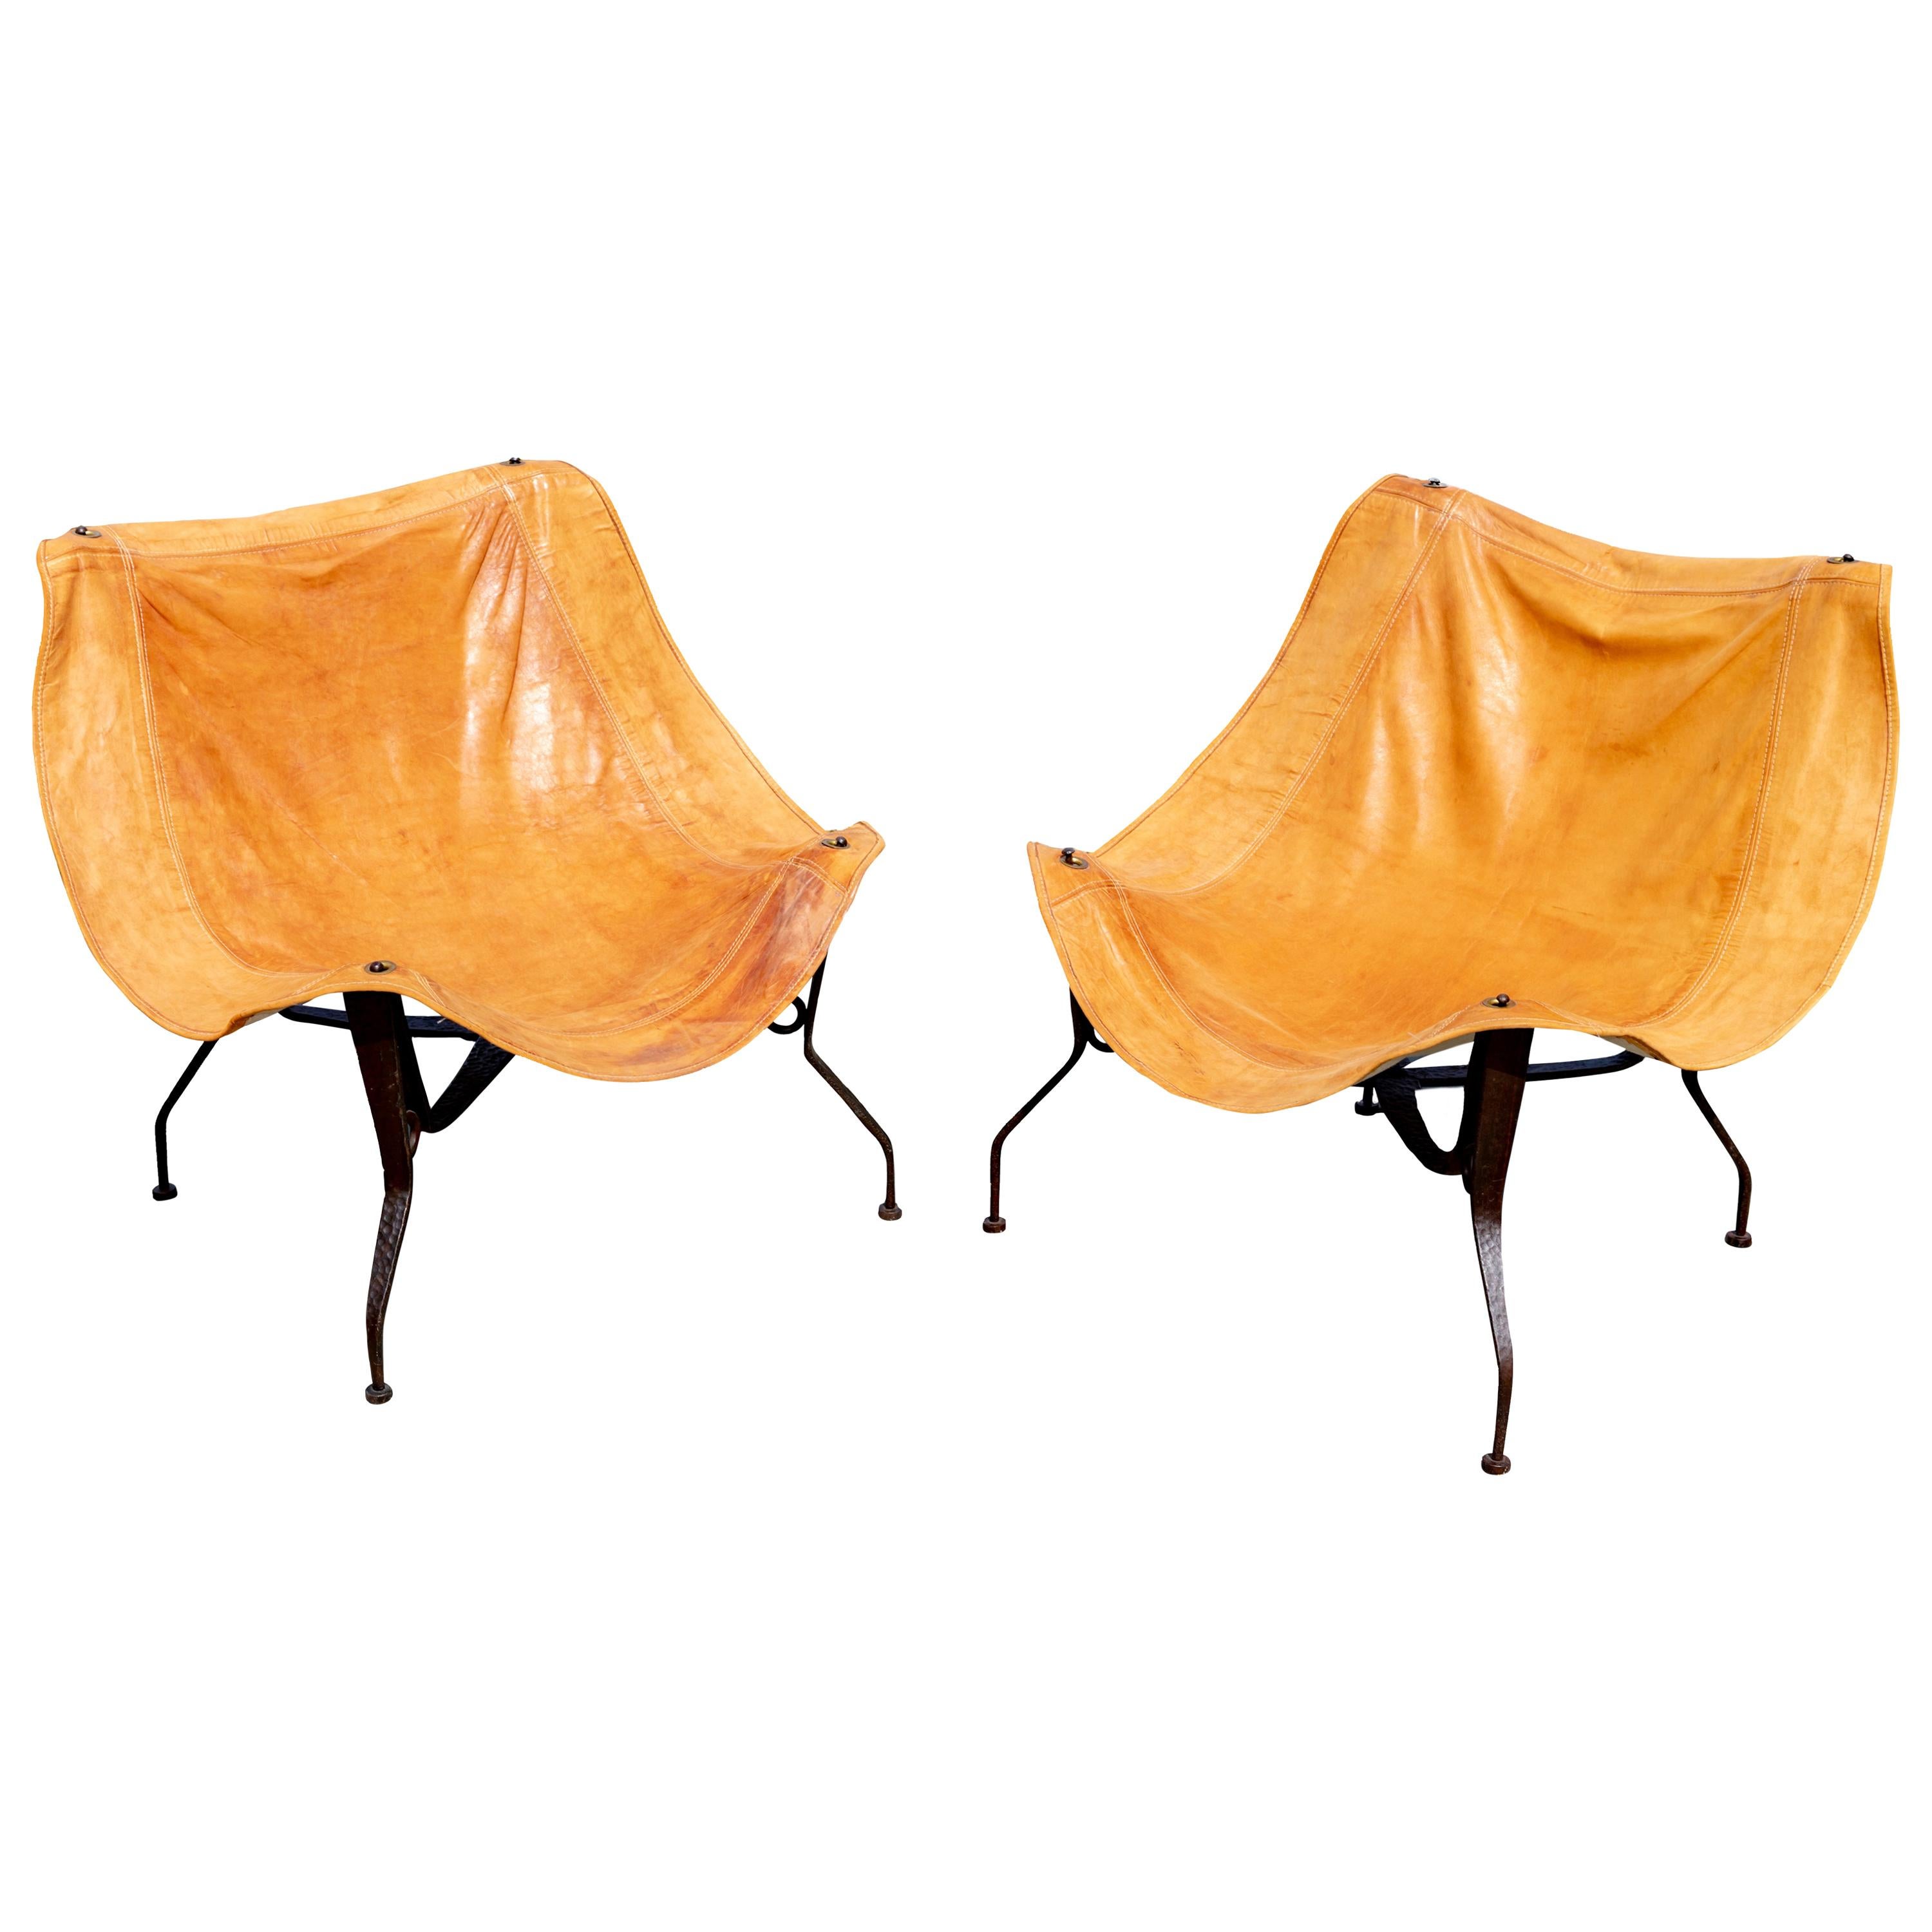 Pair of Hammered Frame Iron Chairs with Suspended Leather Seats